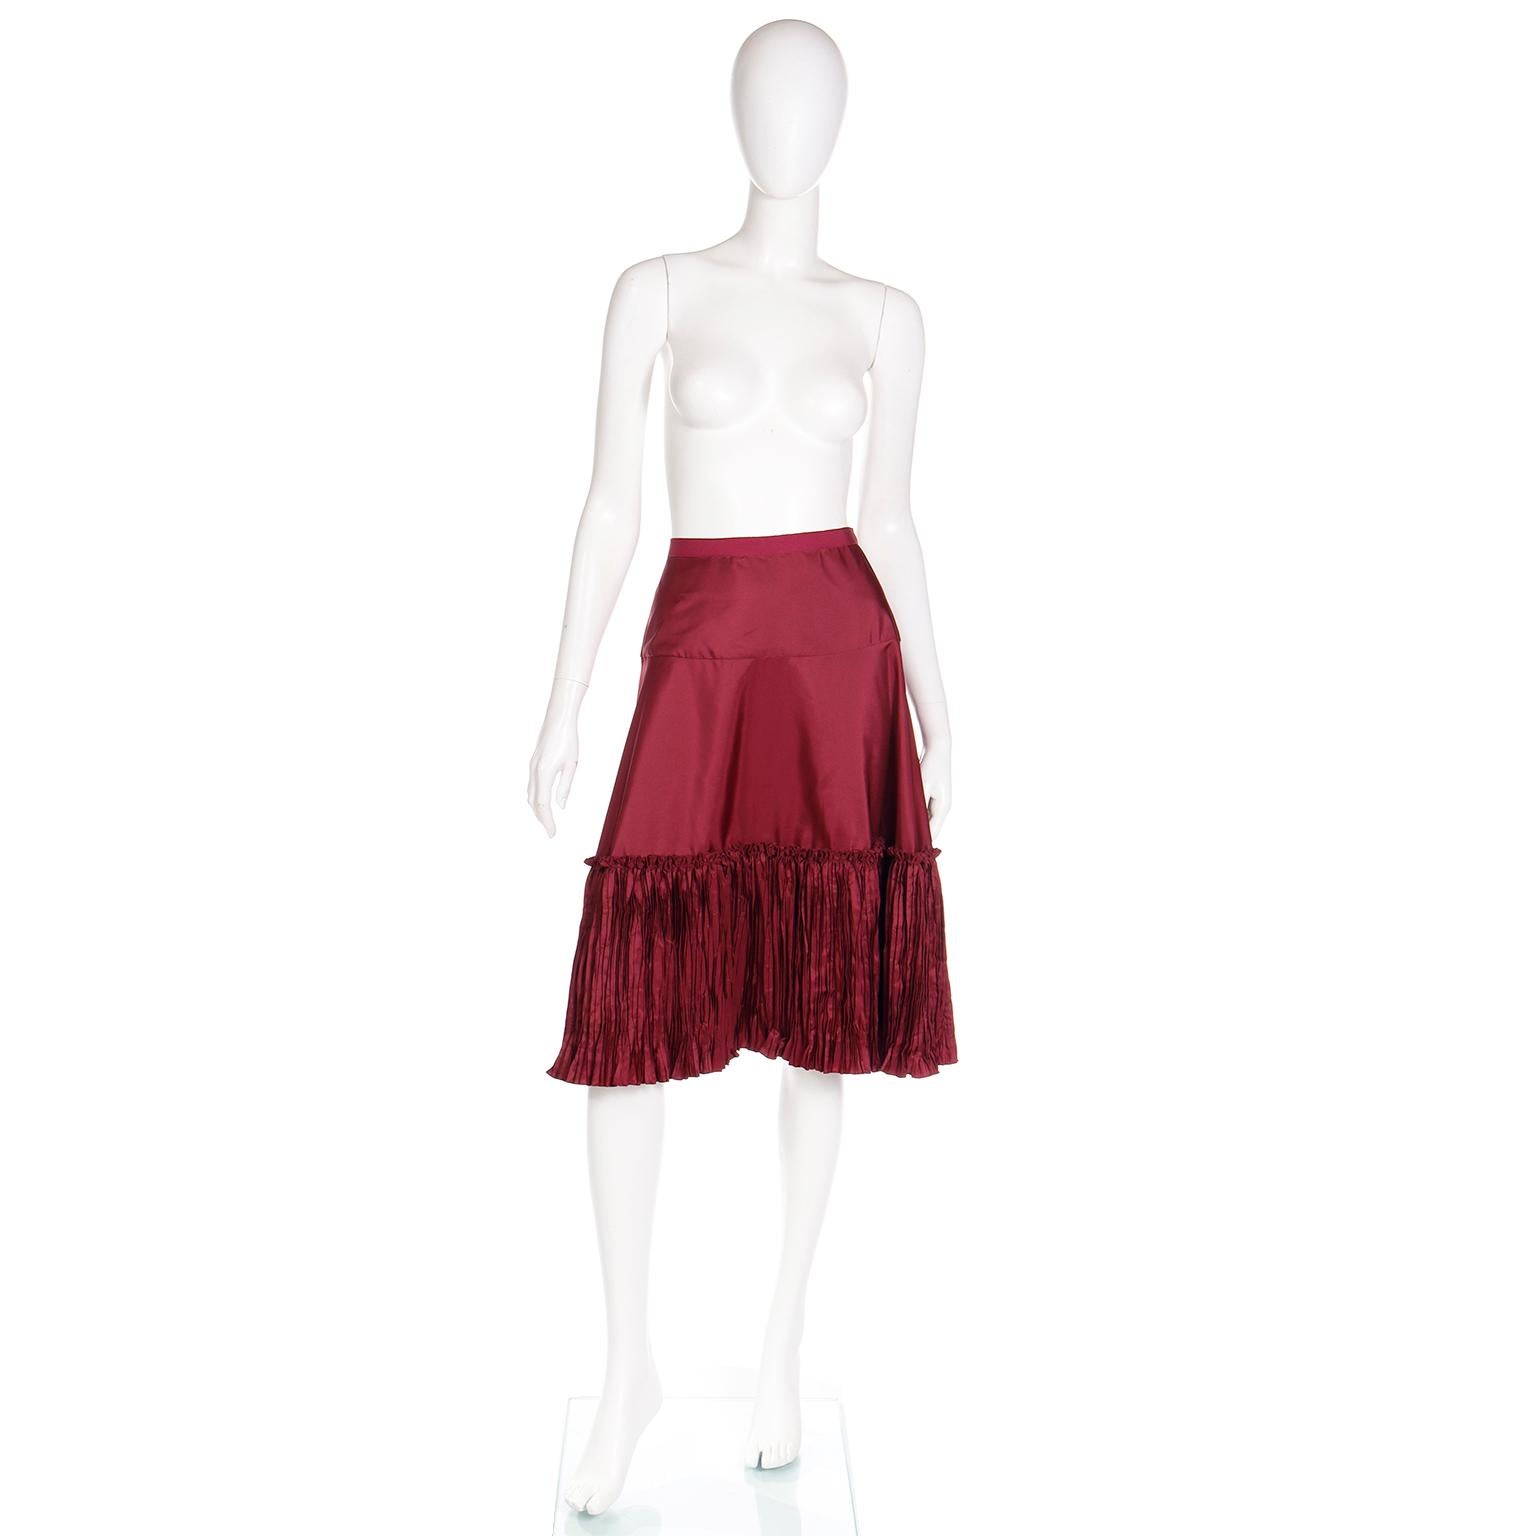 We are huge Oscar de la Renta fans and this fun vintage skirt is a perfect piece to add to any holiday wardrobe! This high waisted skirt is in a luxurious burgundy taffeta and it has a unique bottom tier that is vertically pleated in a Fortuny